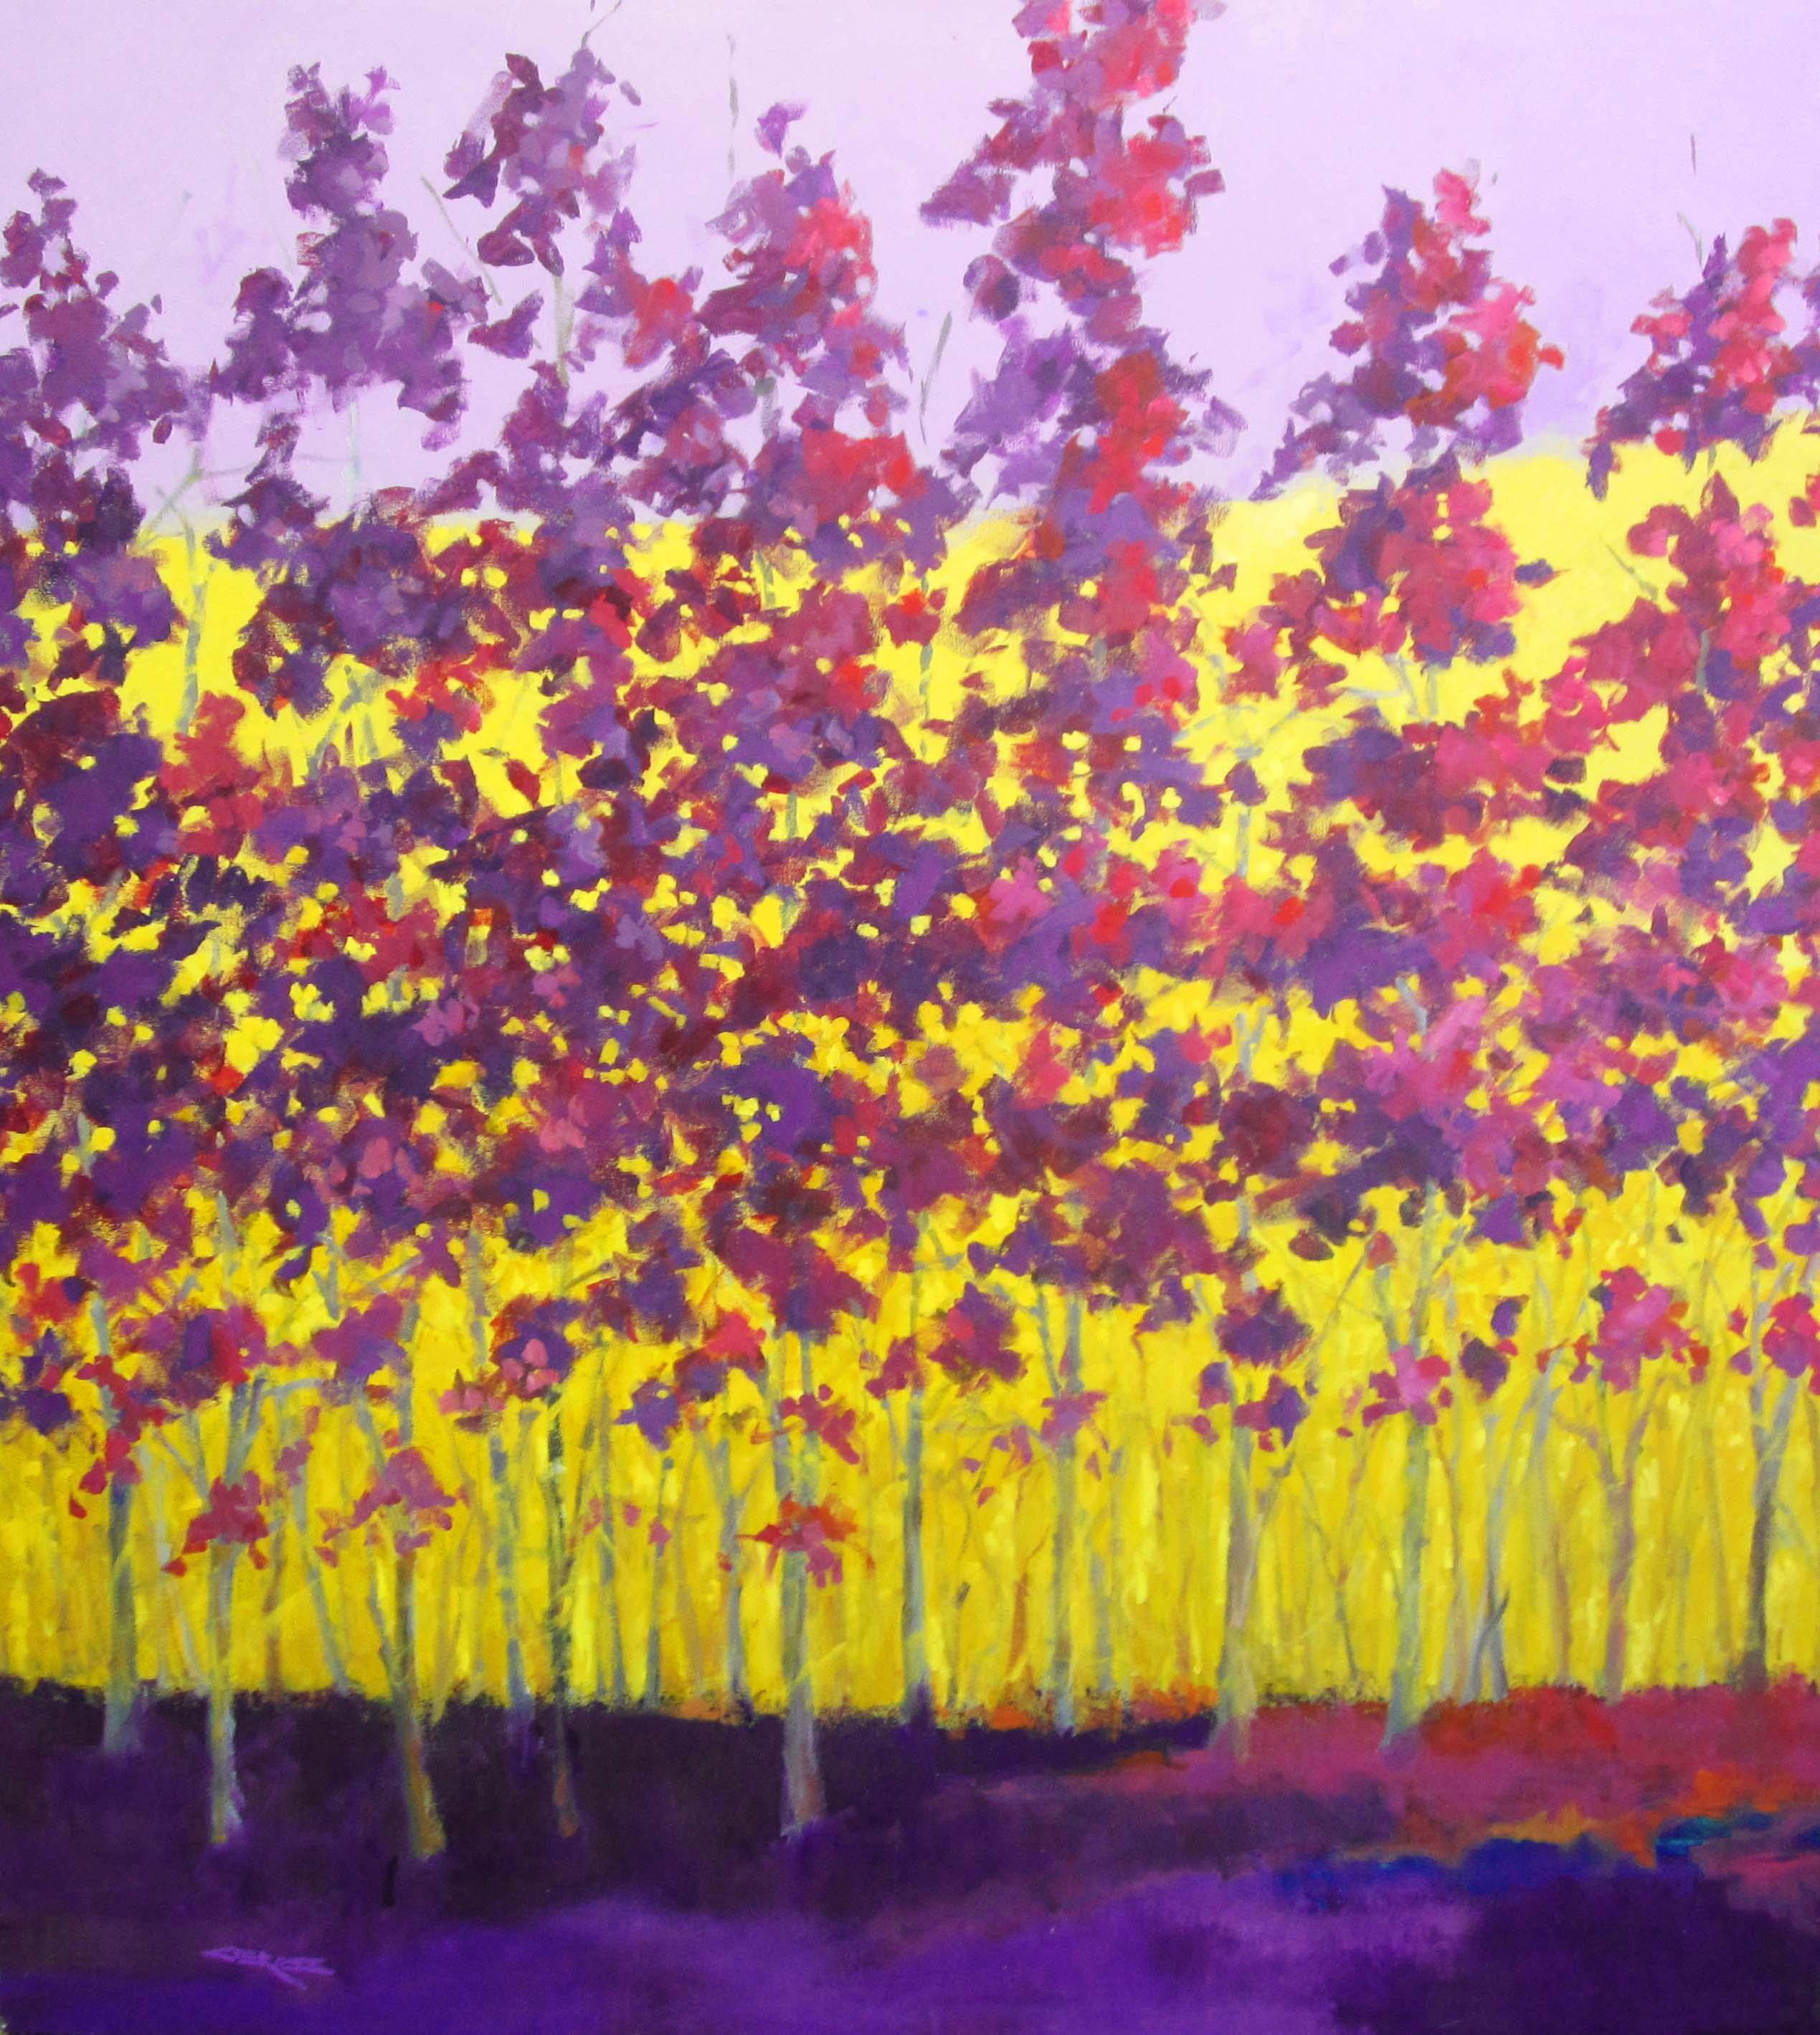 Charles Emery Ross Landscape Painting - C.E. Ross, "Purple and Yellow", Colorful Abstract Landscape Acrylic on Canvas